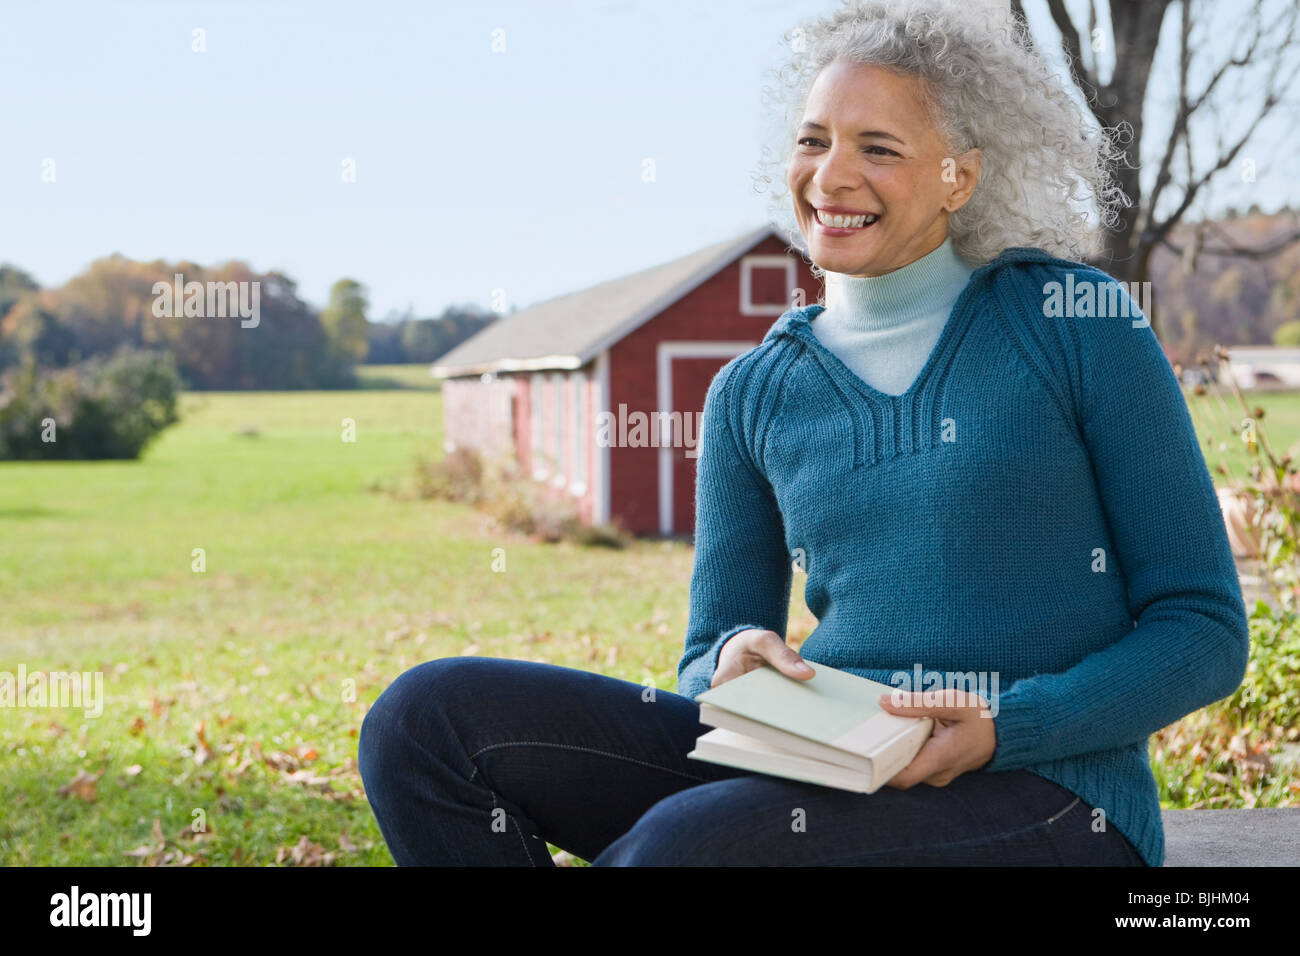 Woman holding a book Stock Photo